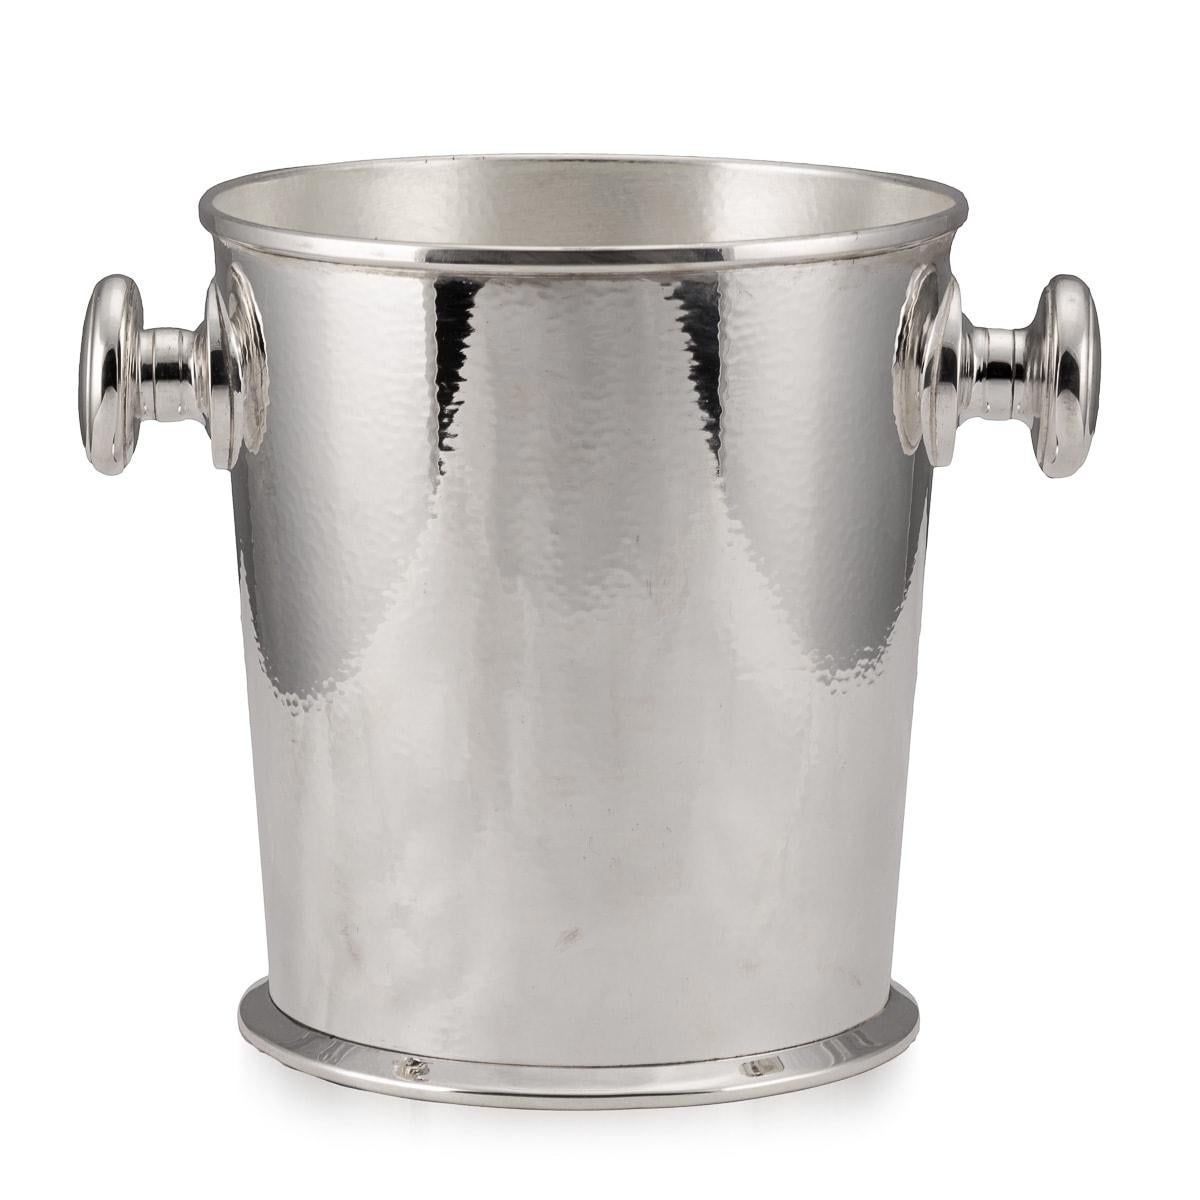 A lovely wine cooler in silver plate, made in the middle part of the 20th century in central Europe, probably Germany. The wonderful hammered effect finish, sometimes referred to as martele’ (French word for hammered), gives this special item a